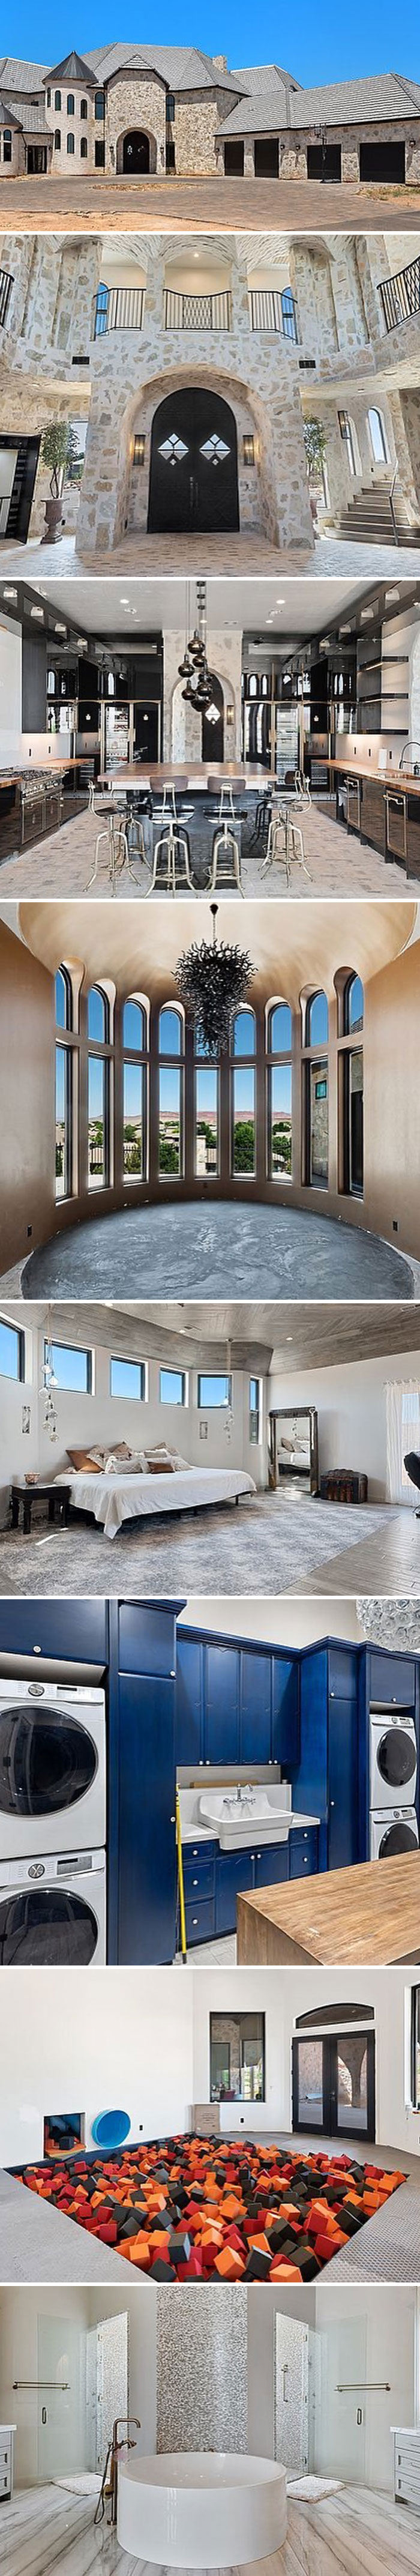 Every Home Needs One Of These Rooms. $5,900,000